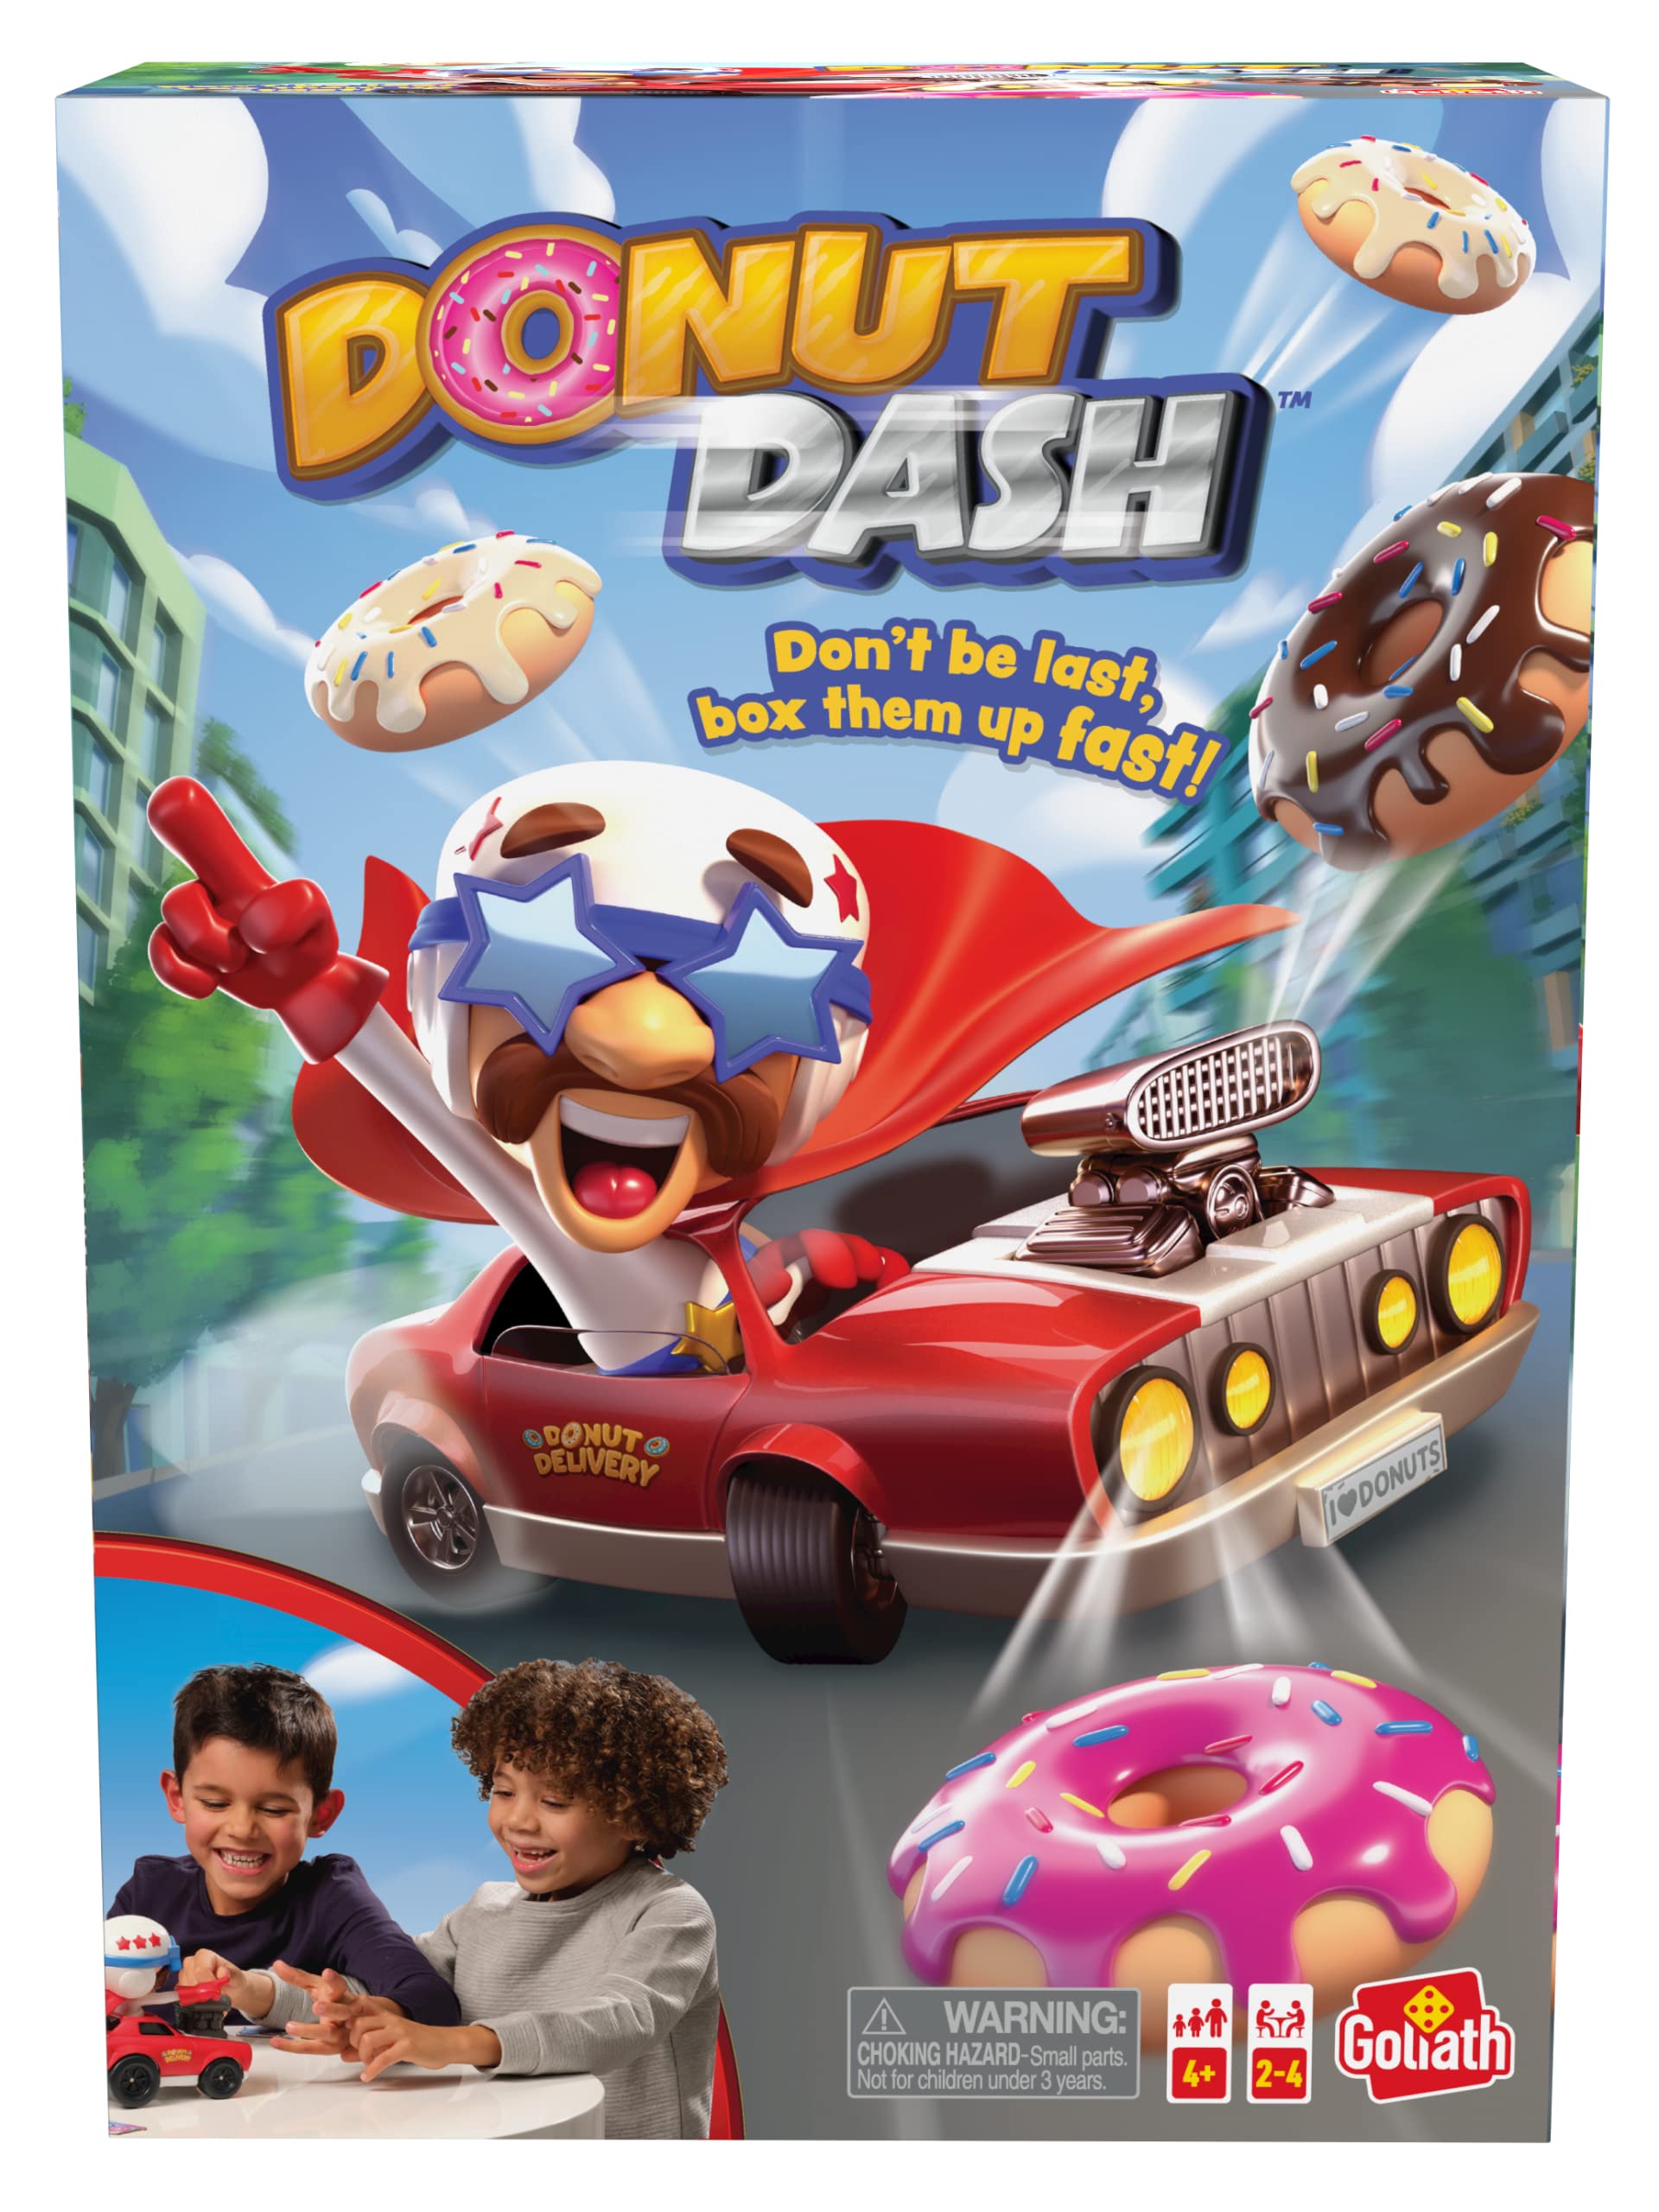 Goliath Donut Dash Game - Race to Pick Up Matching Donuts, Racecar Does Real Donuts On Table Or Hard Floor - Ages 4 and Up, 2-4 Players